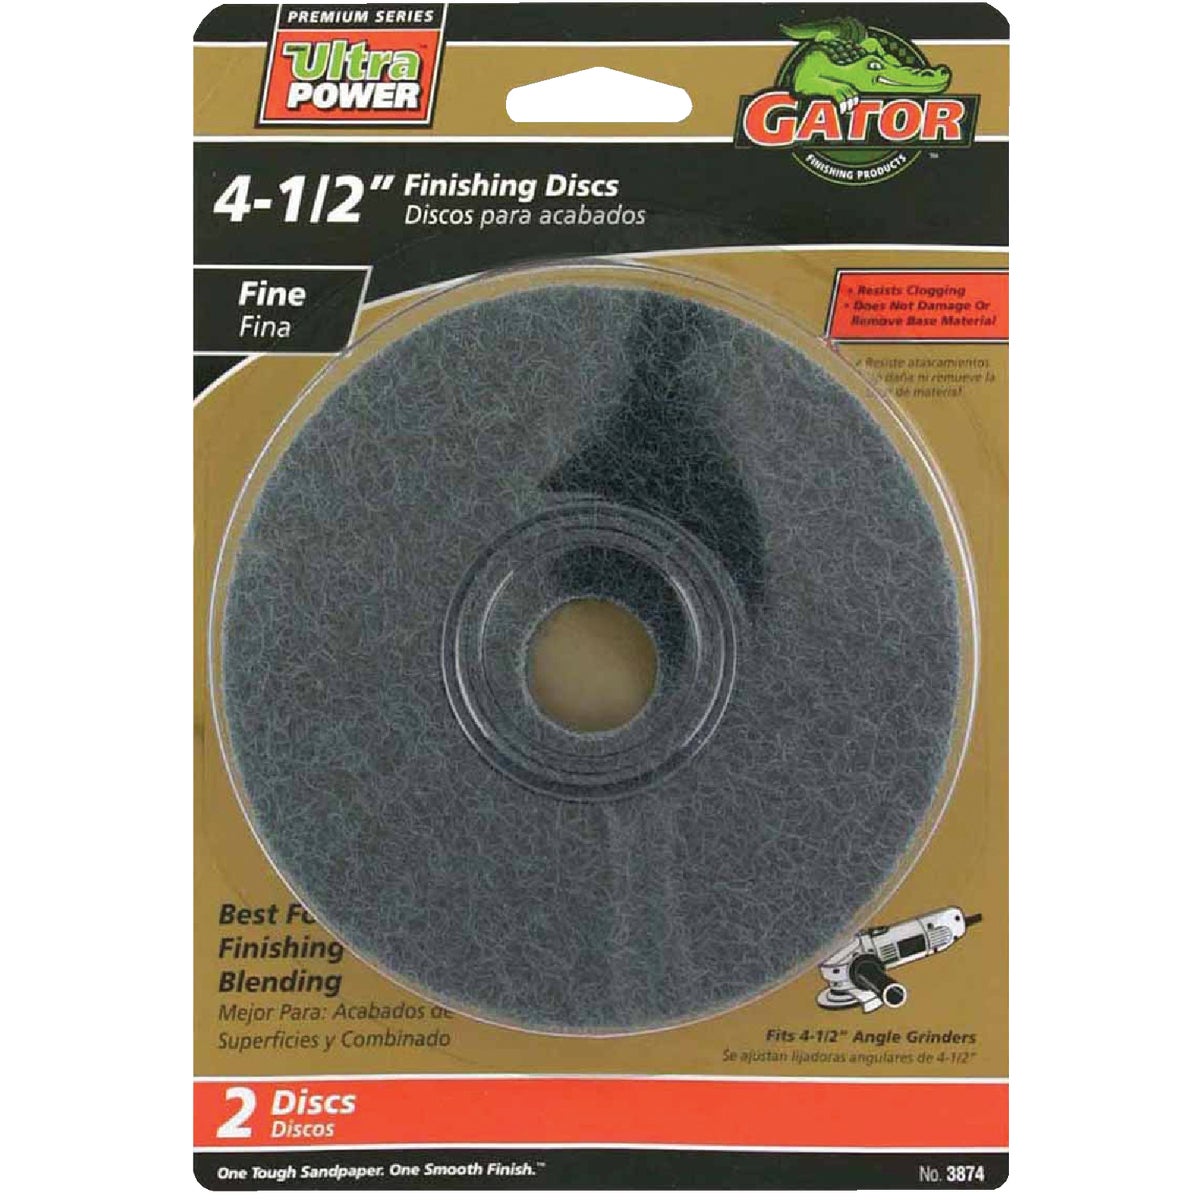 Item 300471, Premium discs are designed to quickly clean a variety of surfaces and 